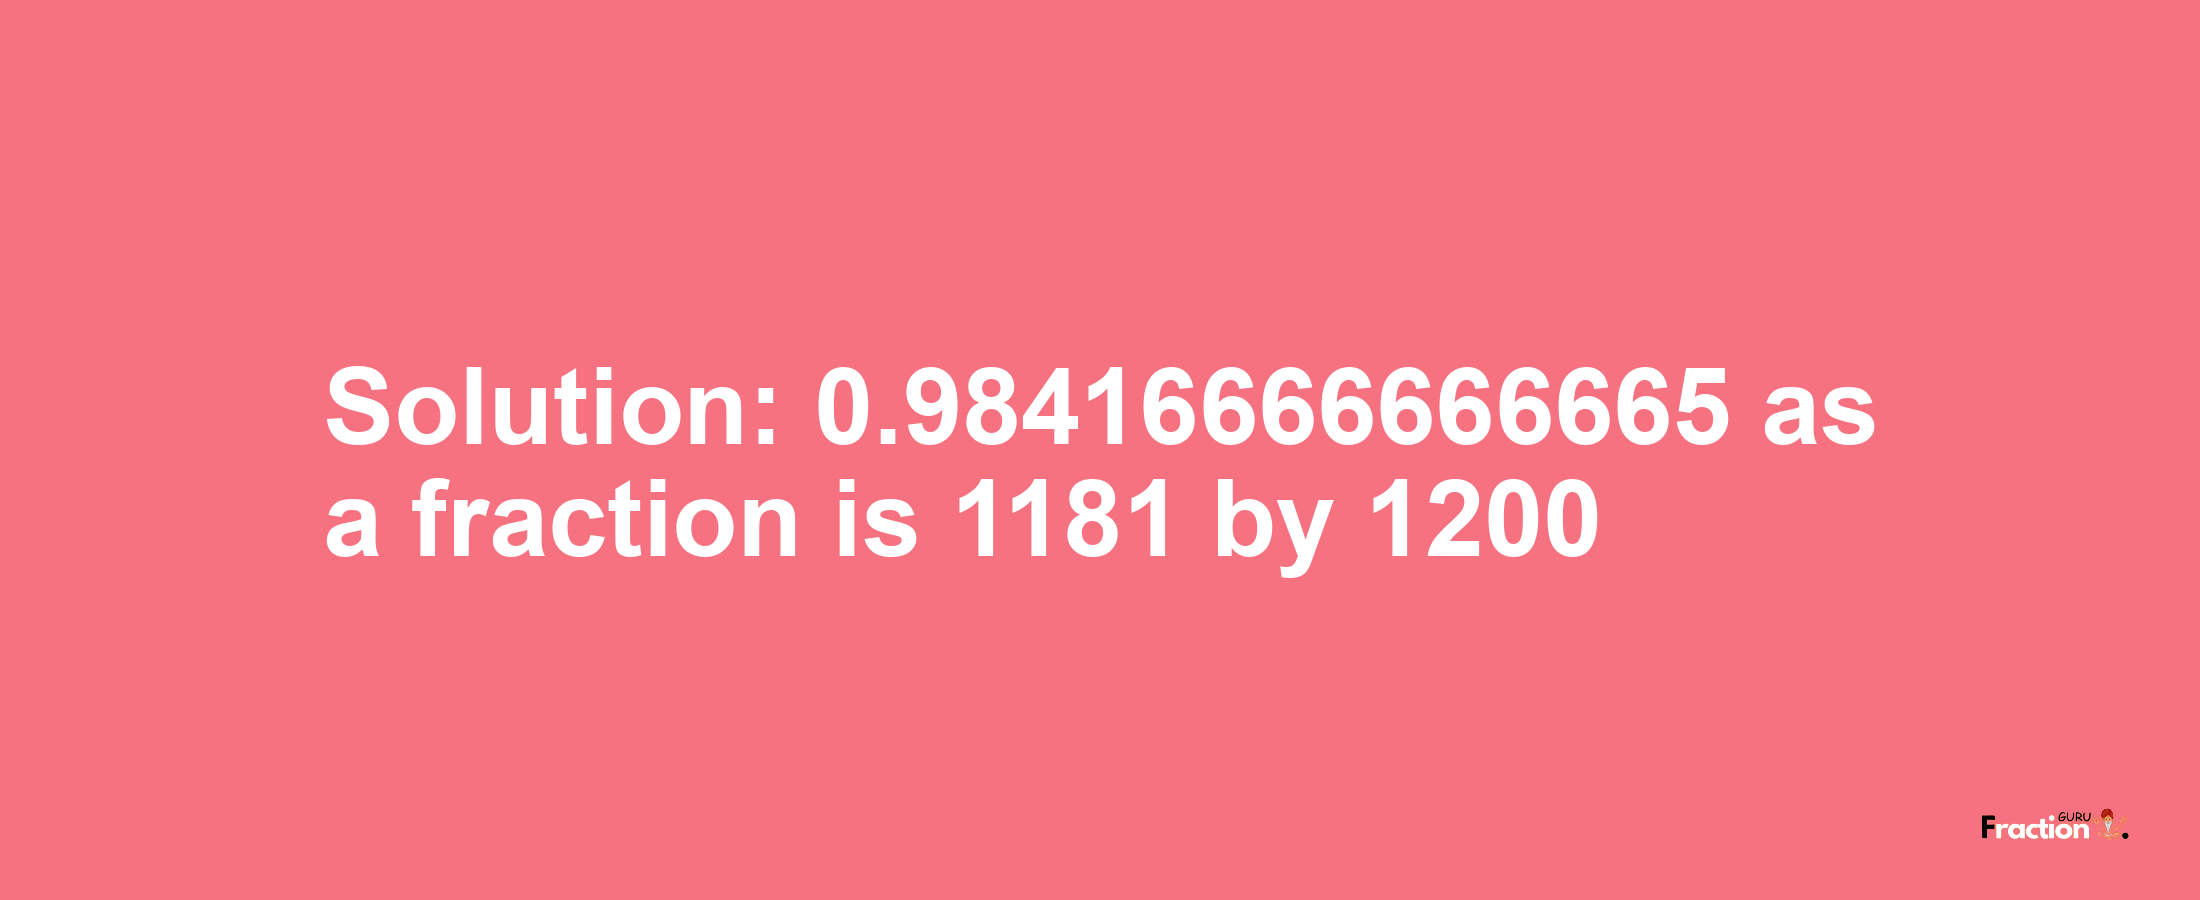 Solution:0.98416666666665 as a fraction is 1181/1200